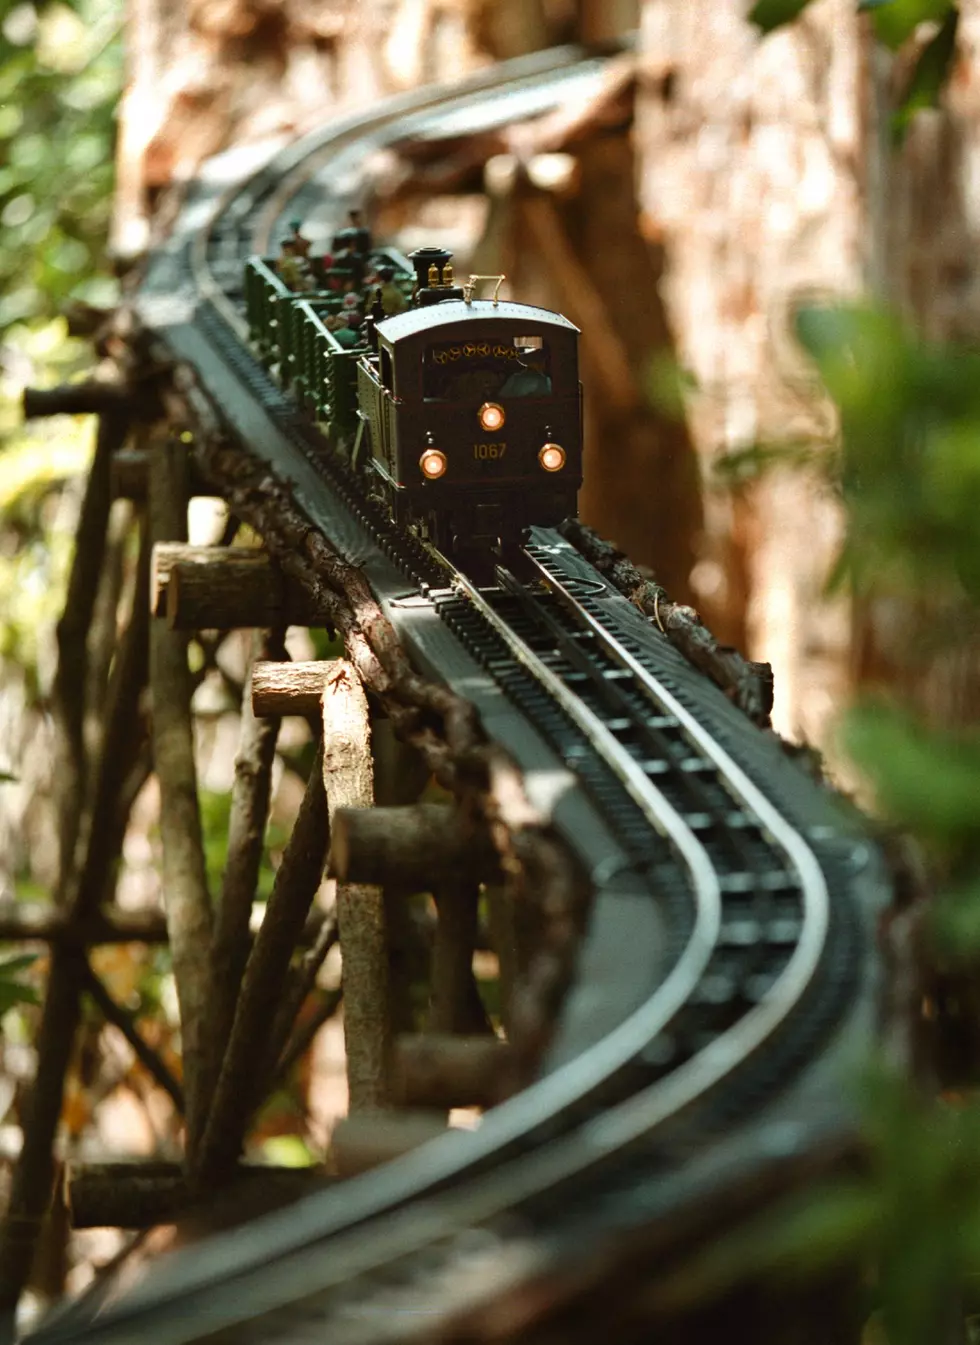 Free Beer &#038; Hot Wings: Man Builds 16-Acre Model Railroad with 50,000 Feet of Track [Video]